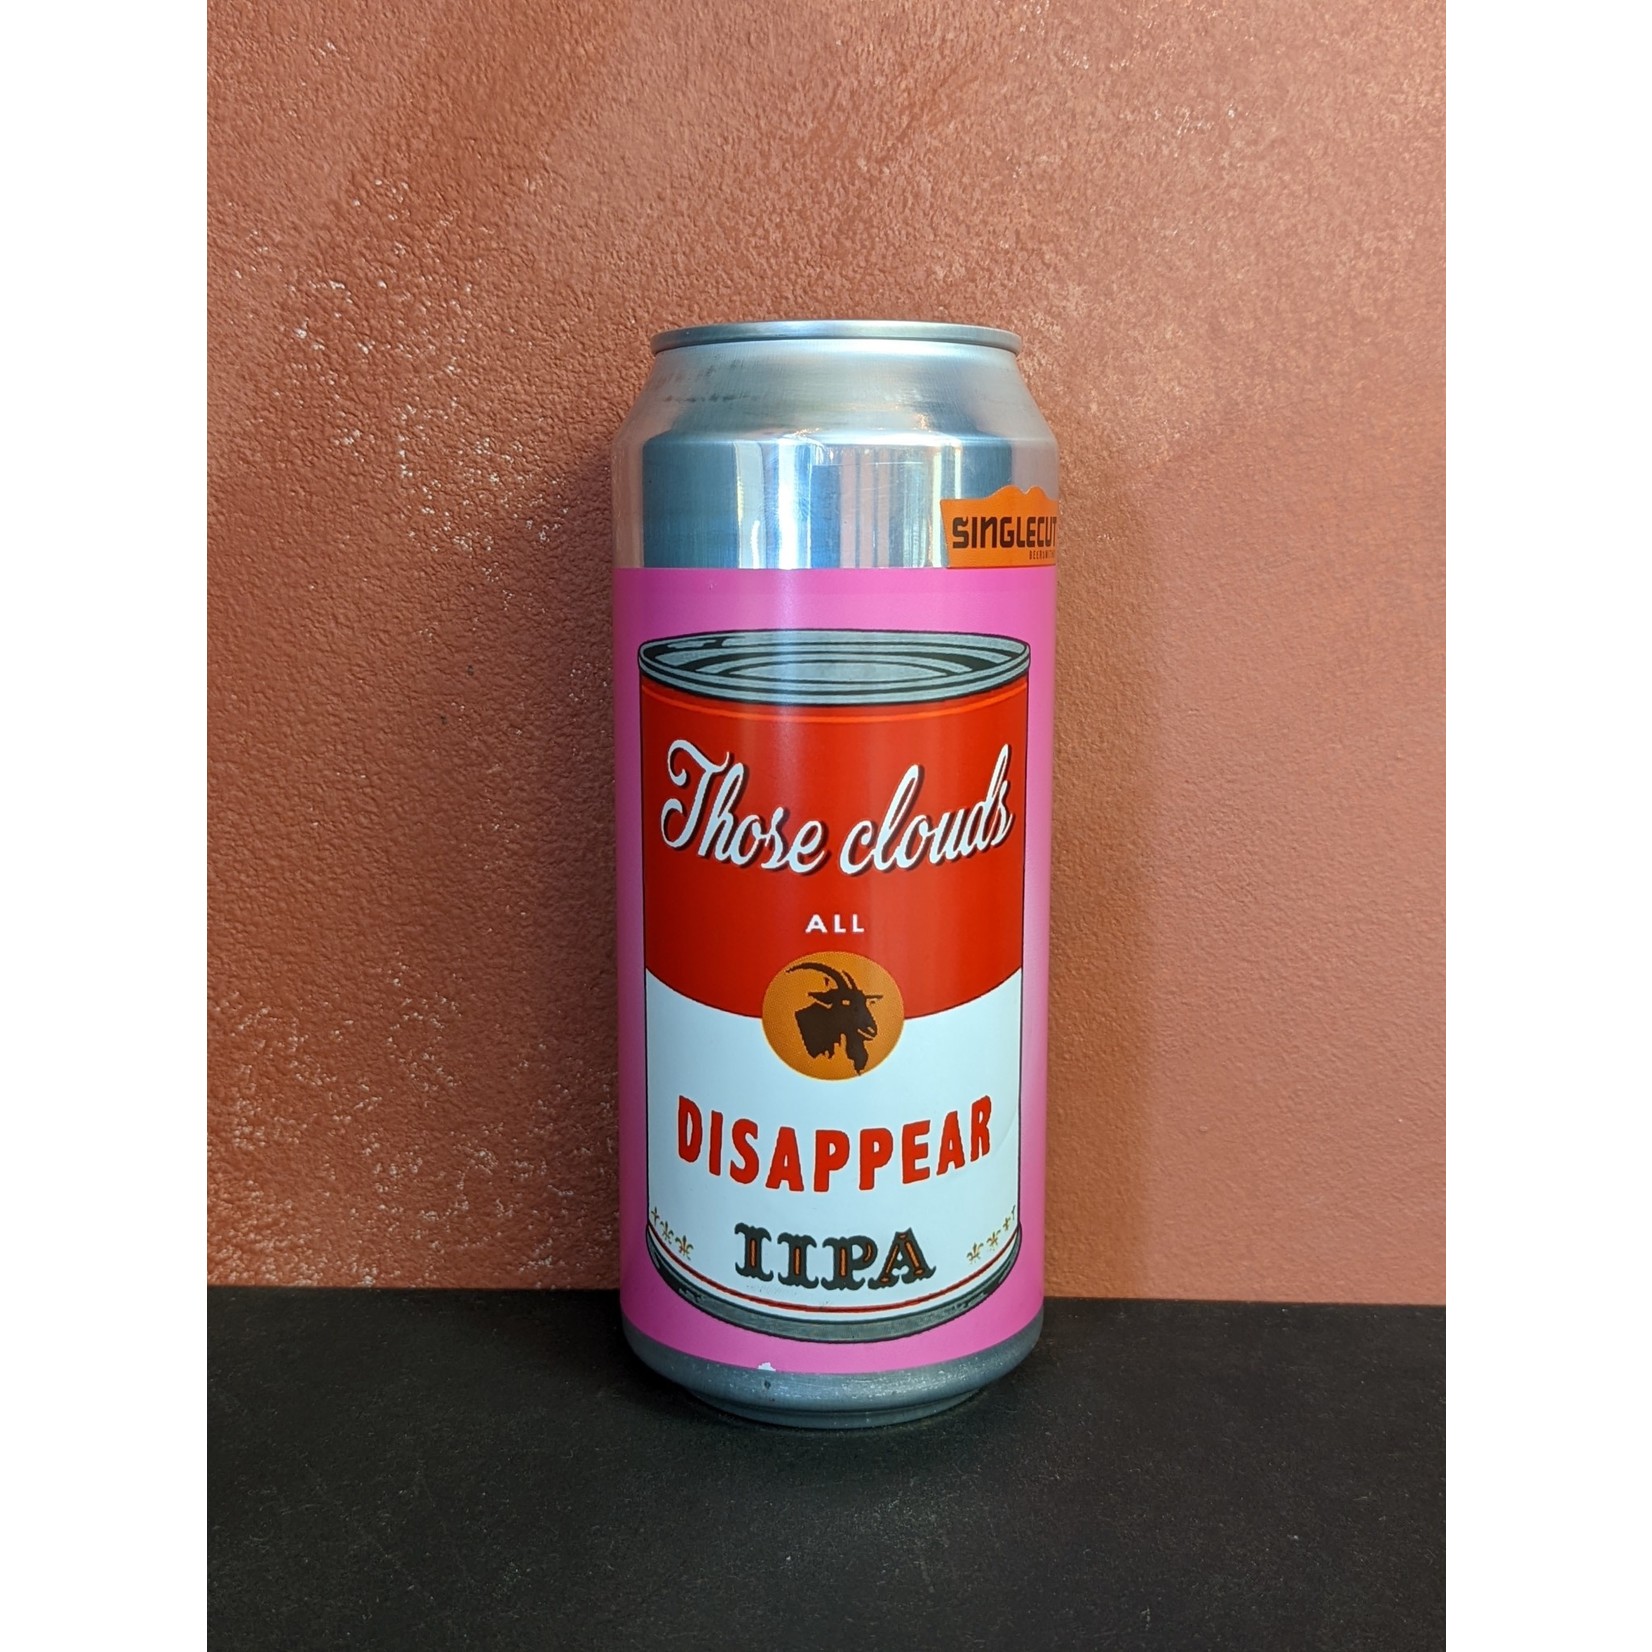 Singlecut "Those Clouds All Disappear" DIPA CAN